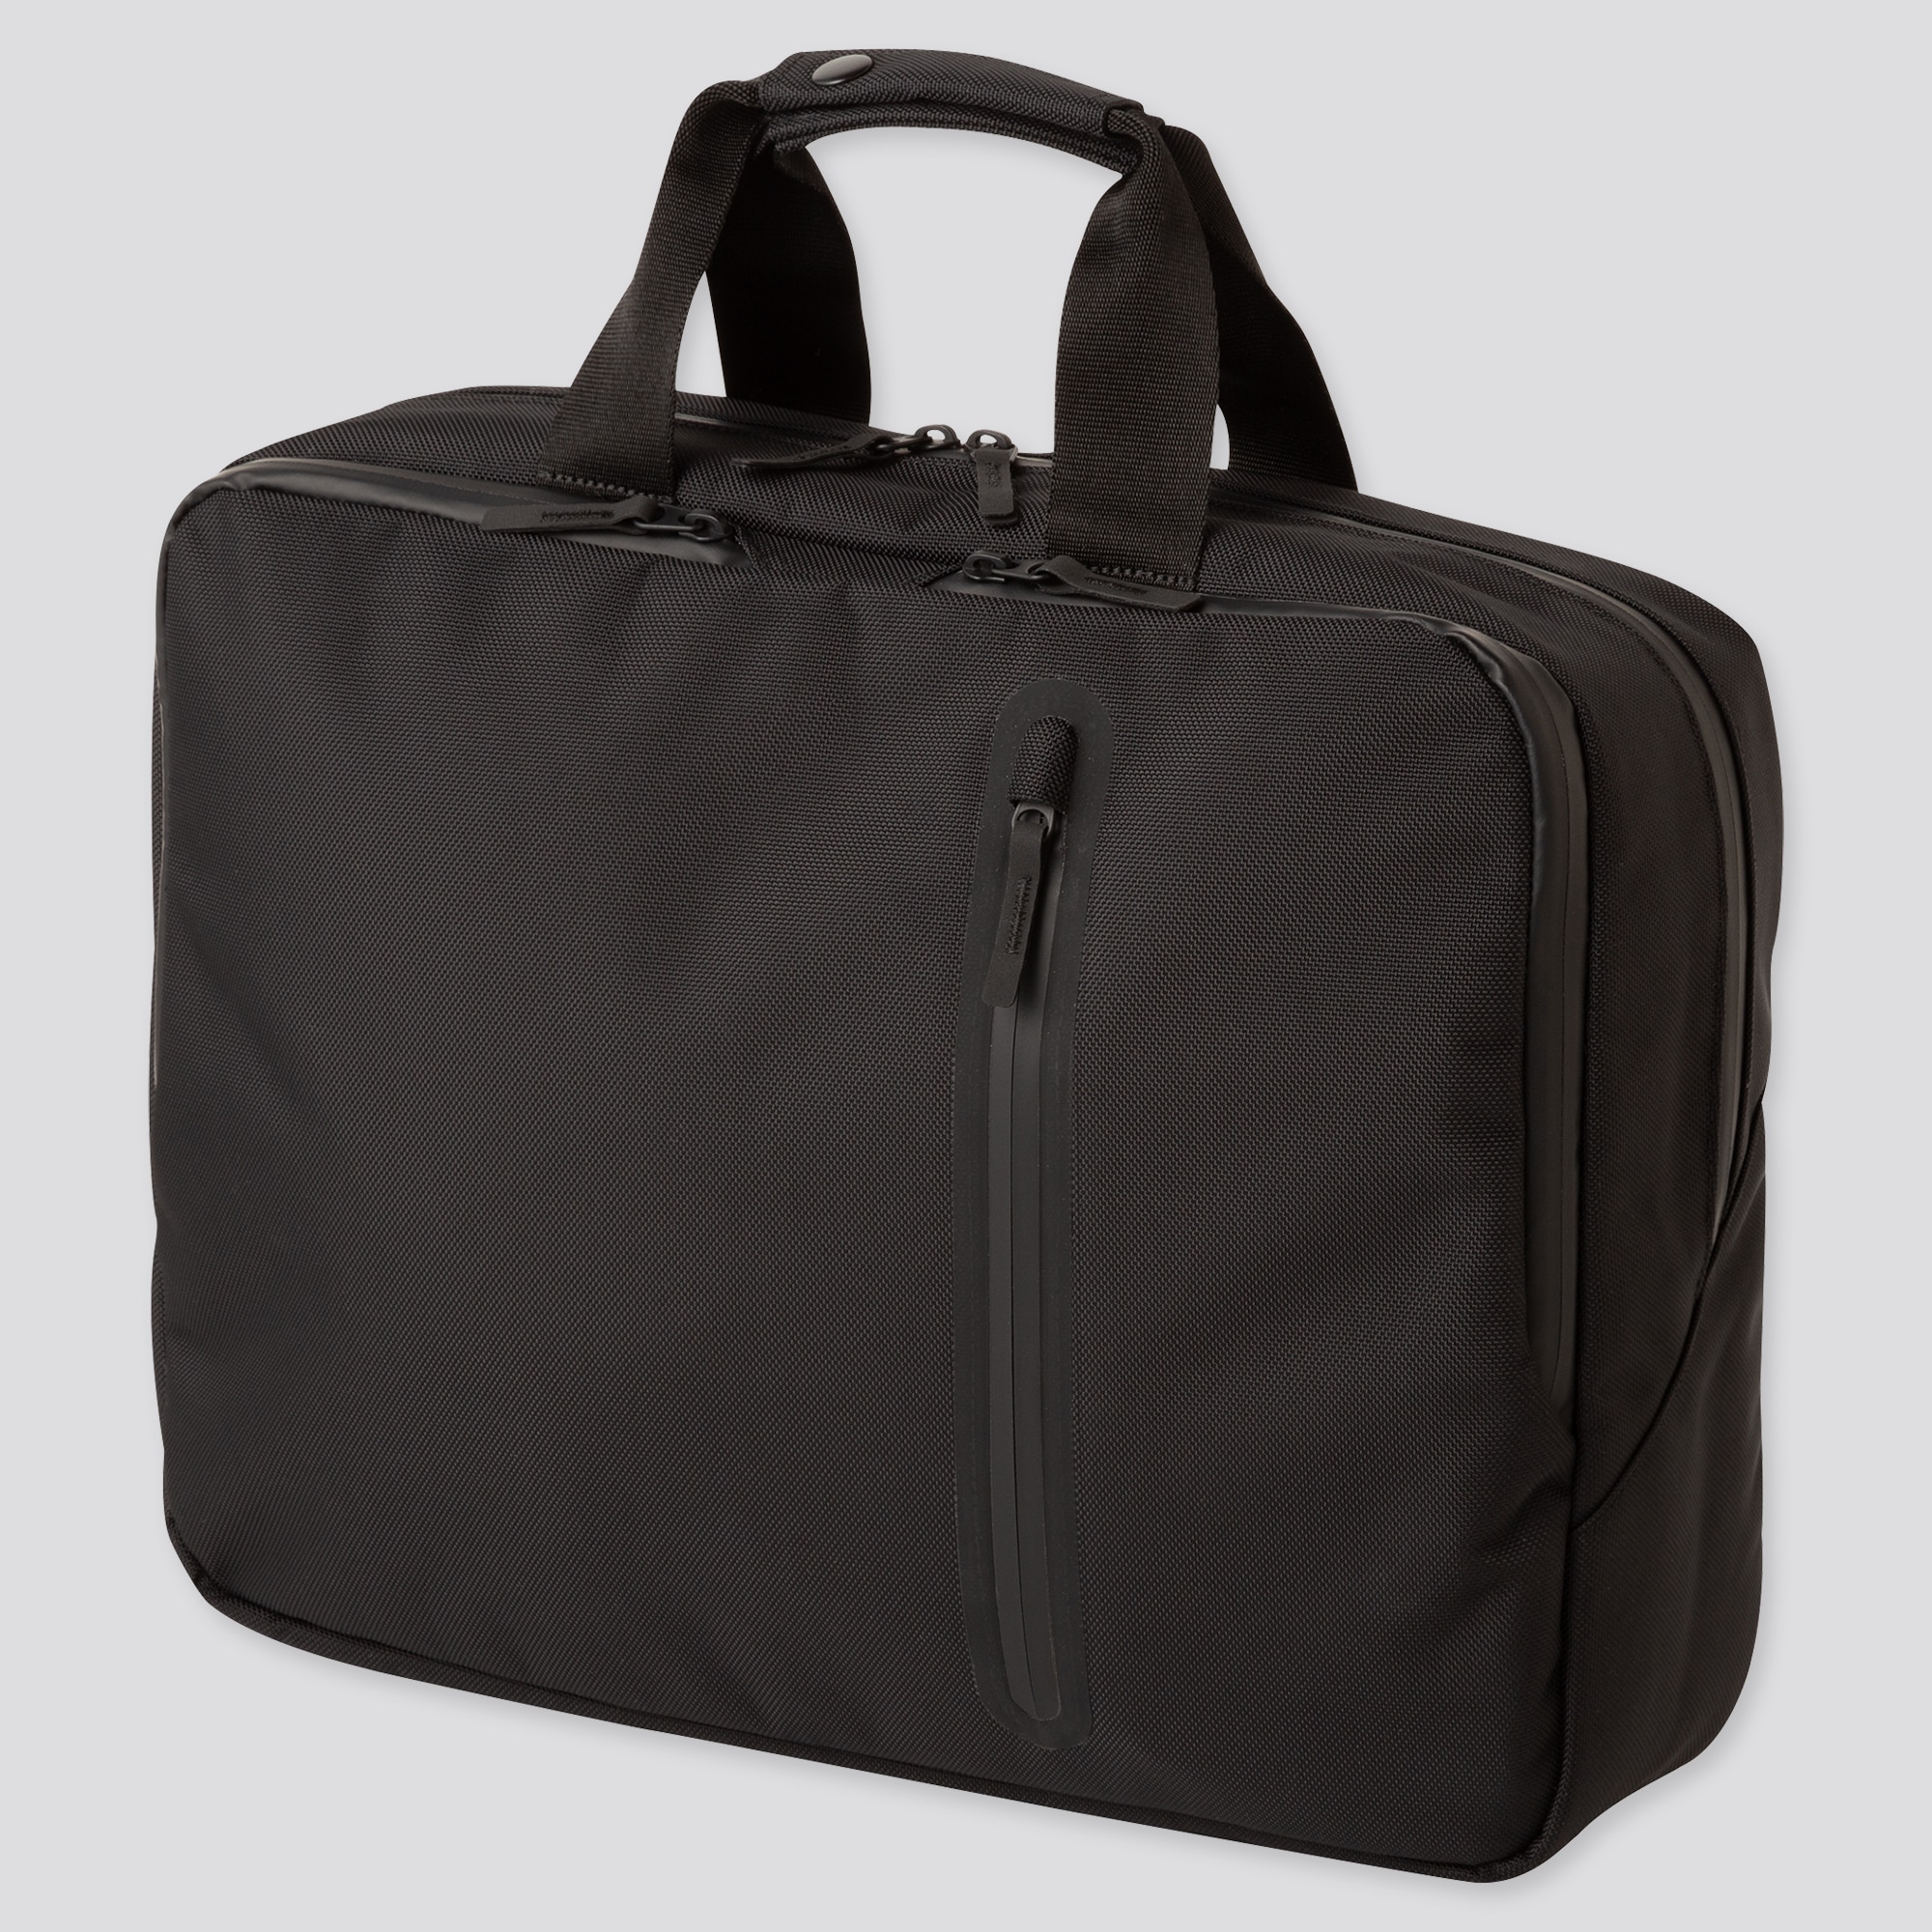 luggage bags online